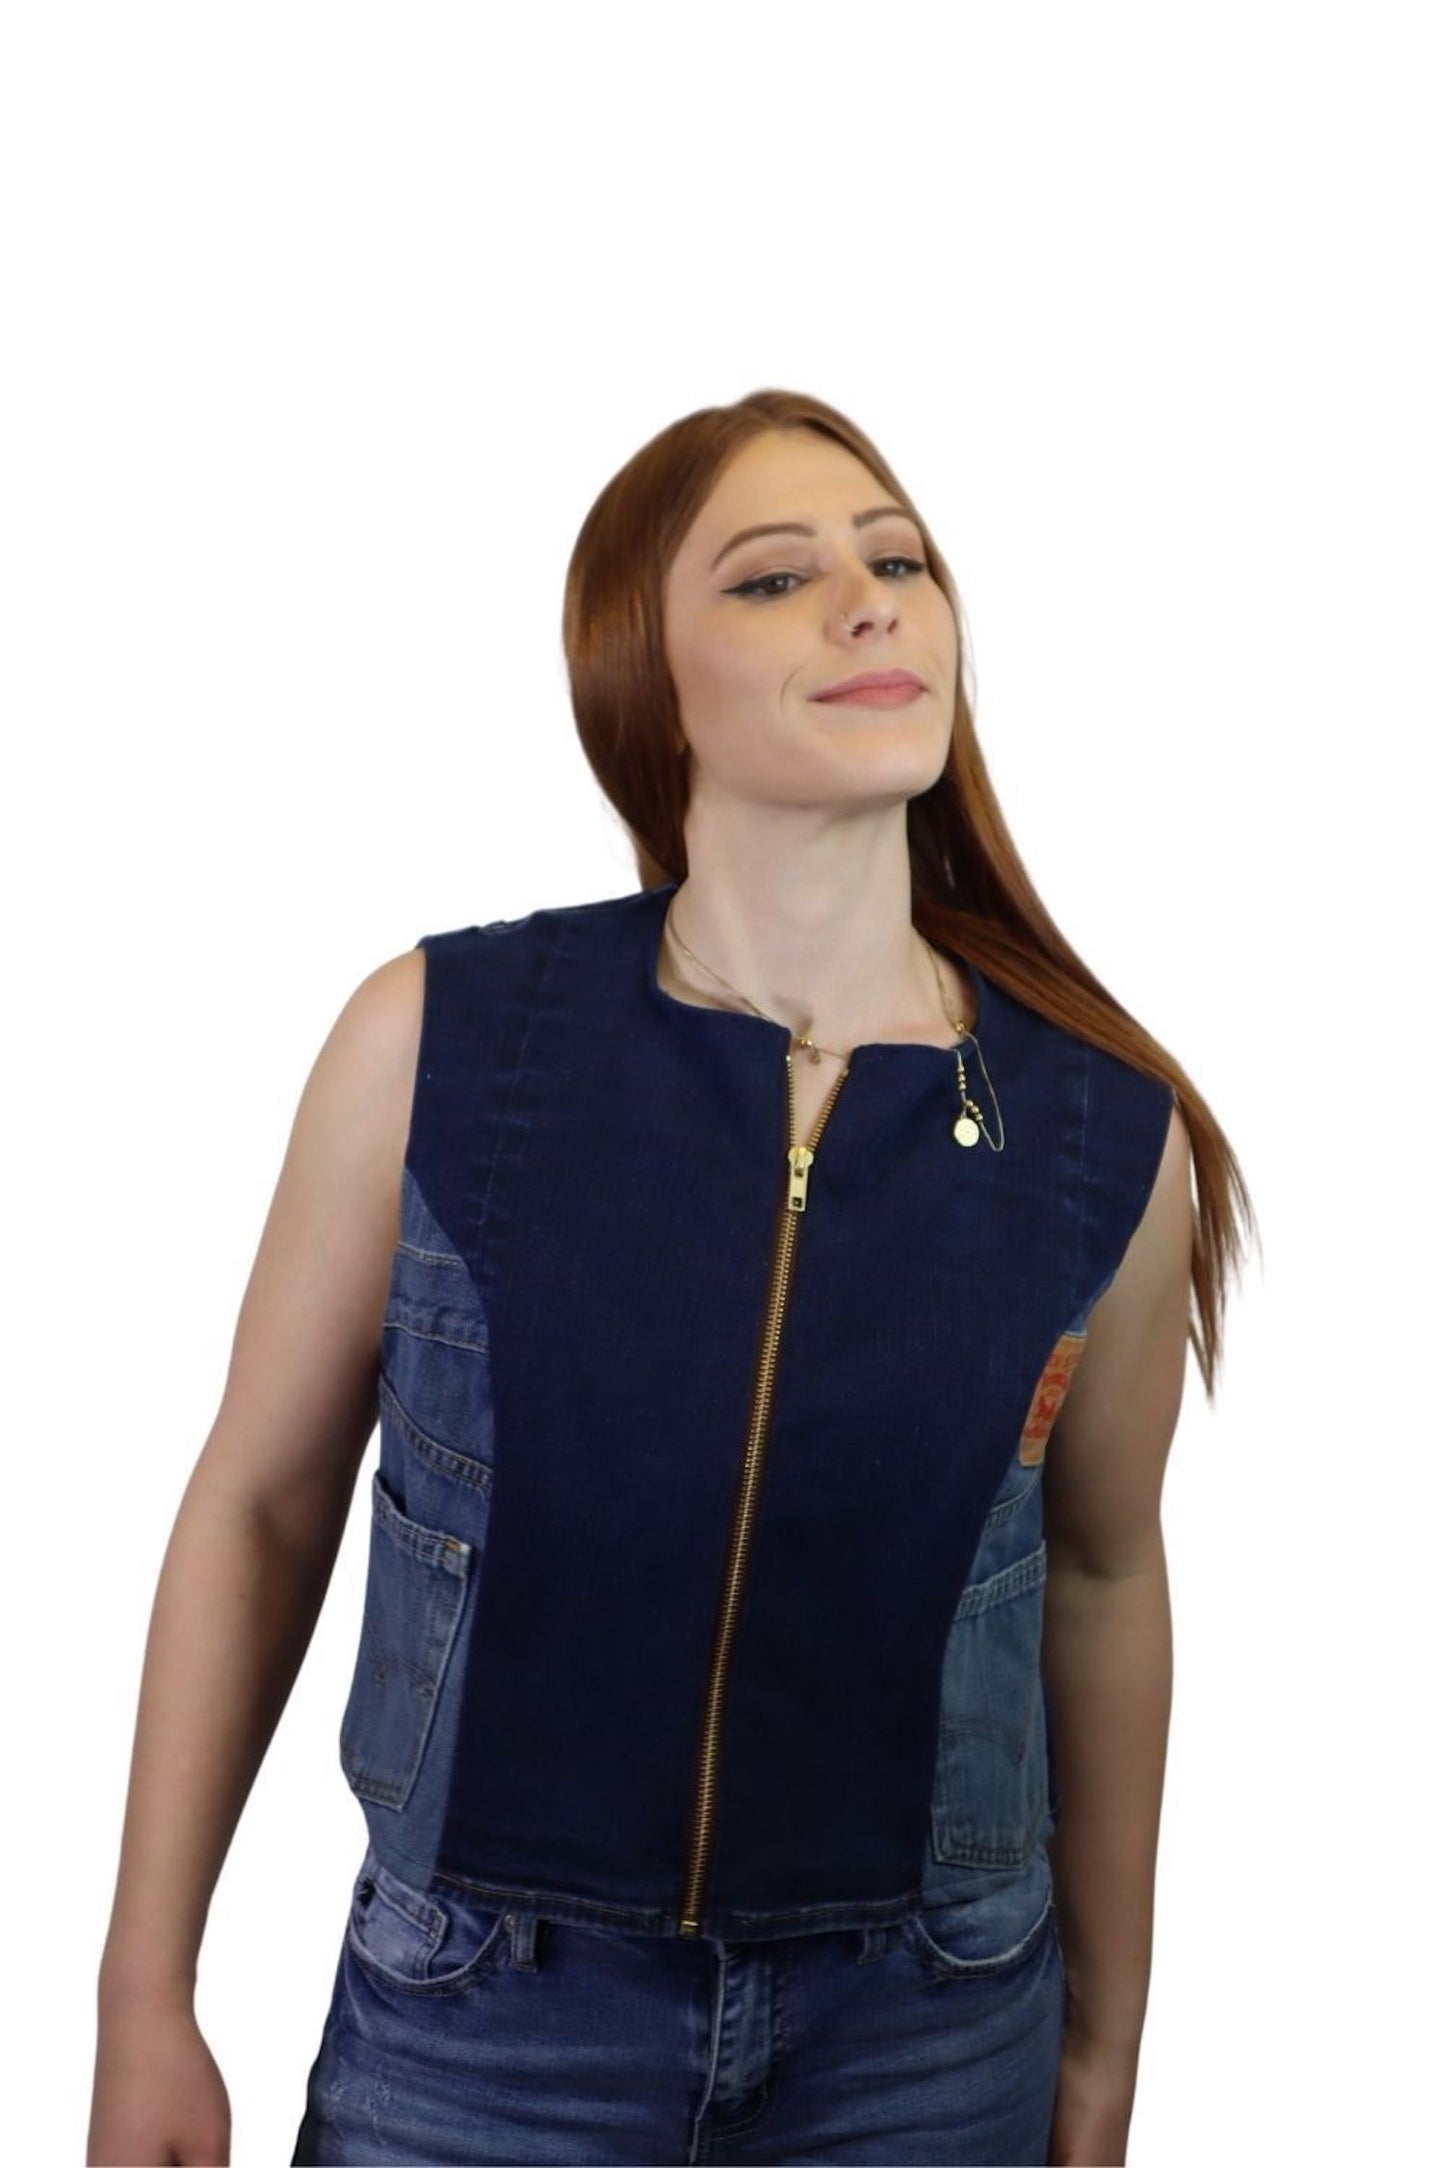 The upcycled Yes vest is upcycled from pants, with a center front zipper and side pockets, always tailored for a flattering fit.